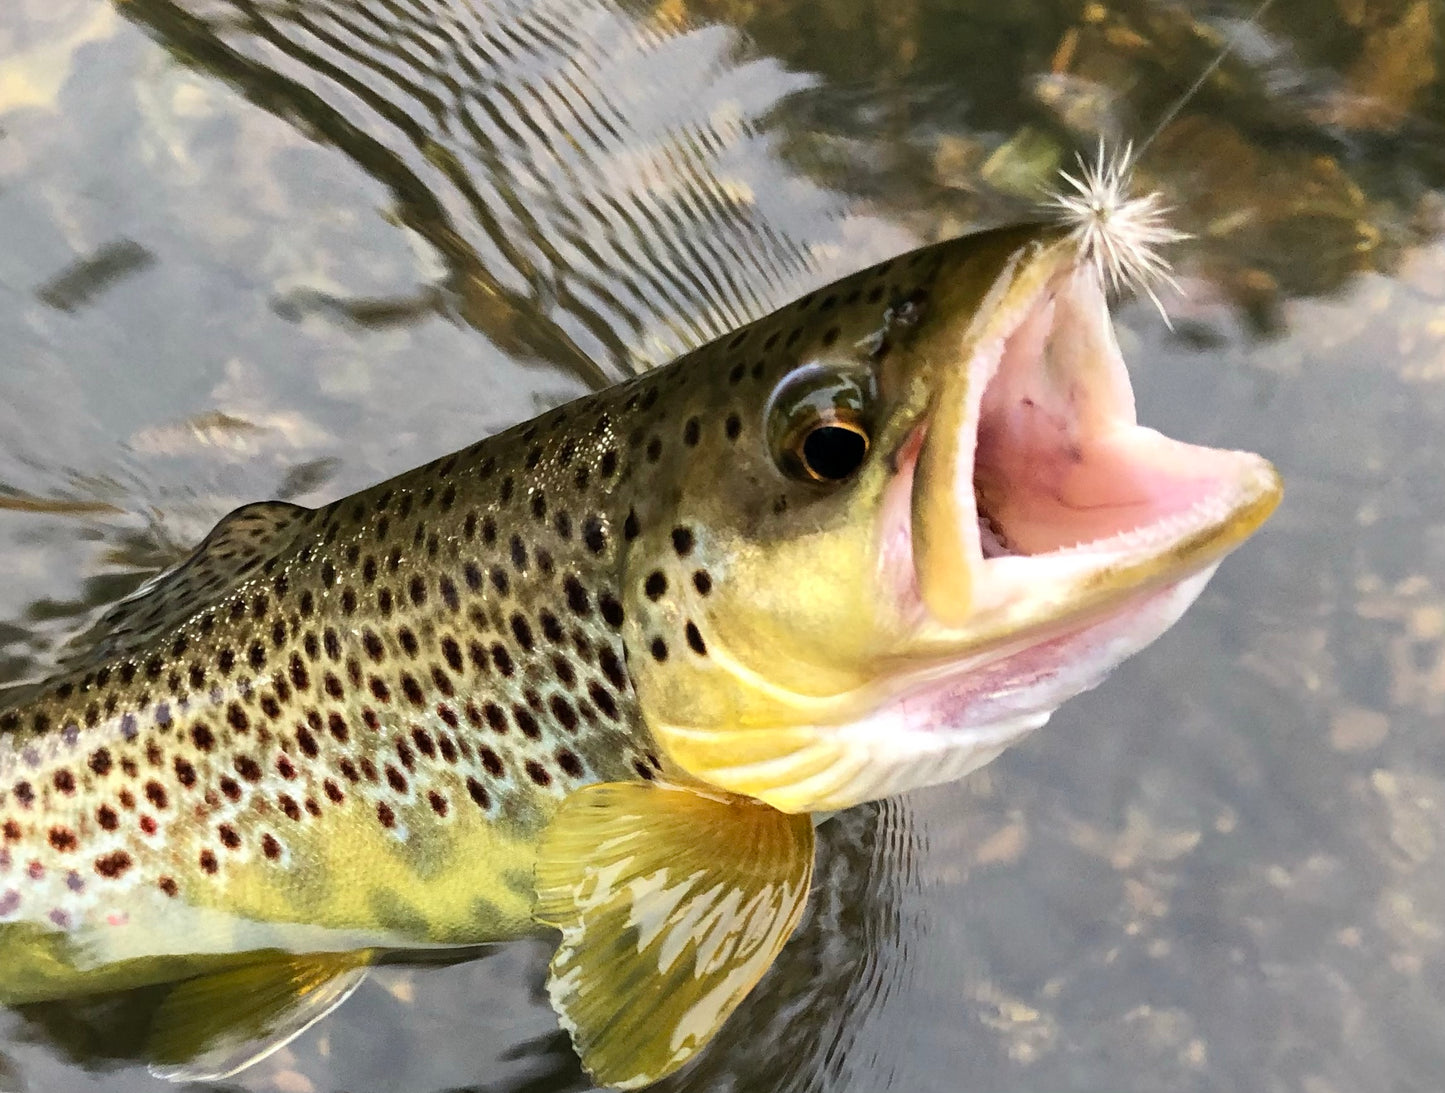 Brown Trout caught with a Caddis